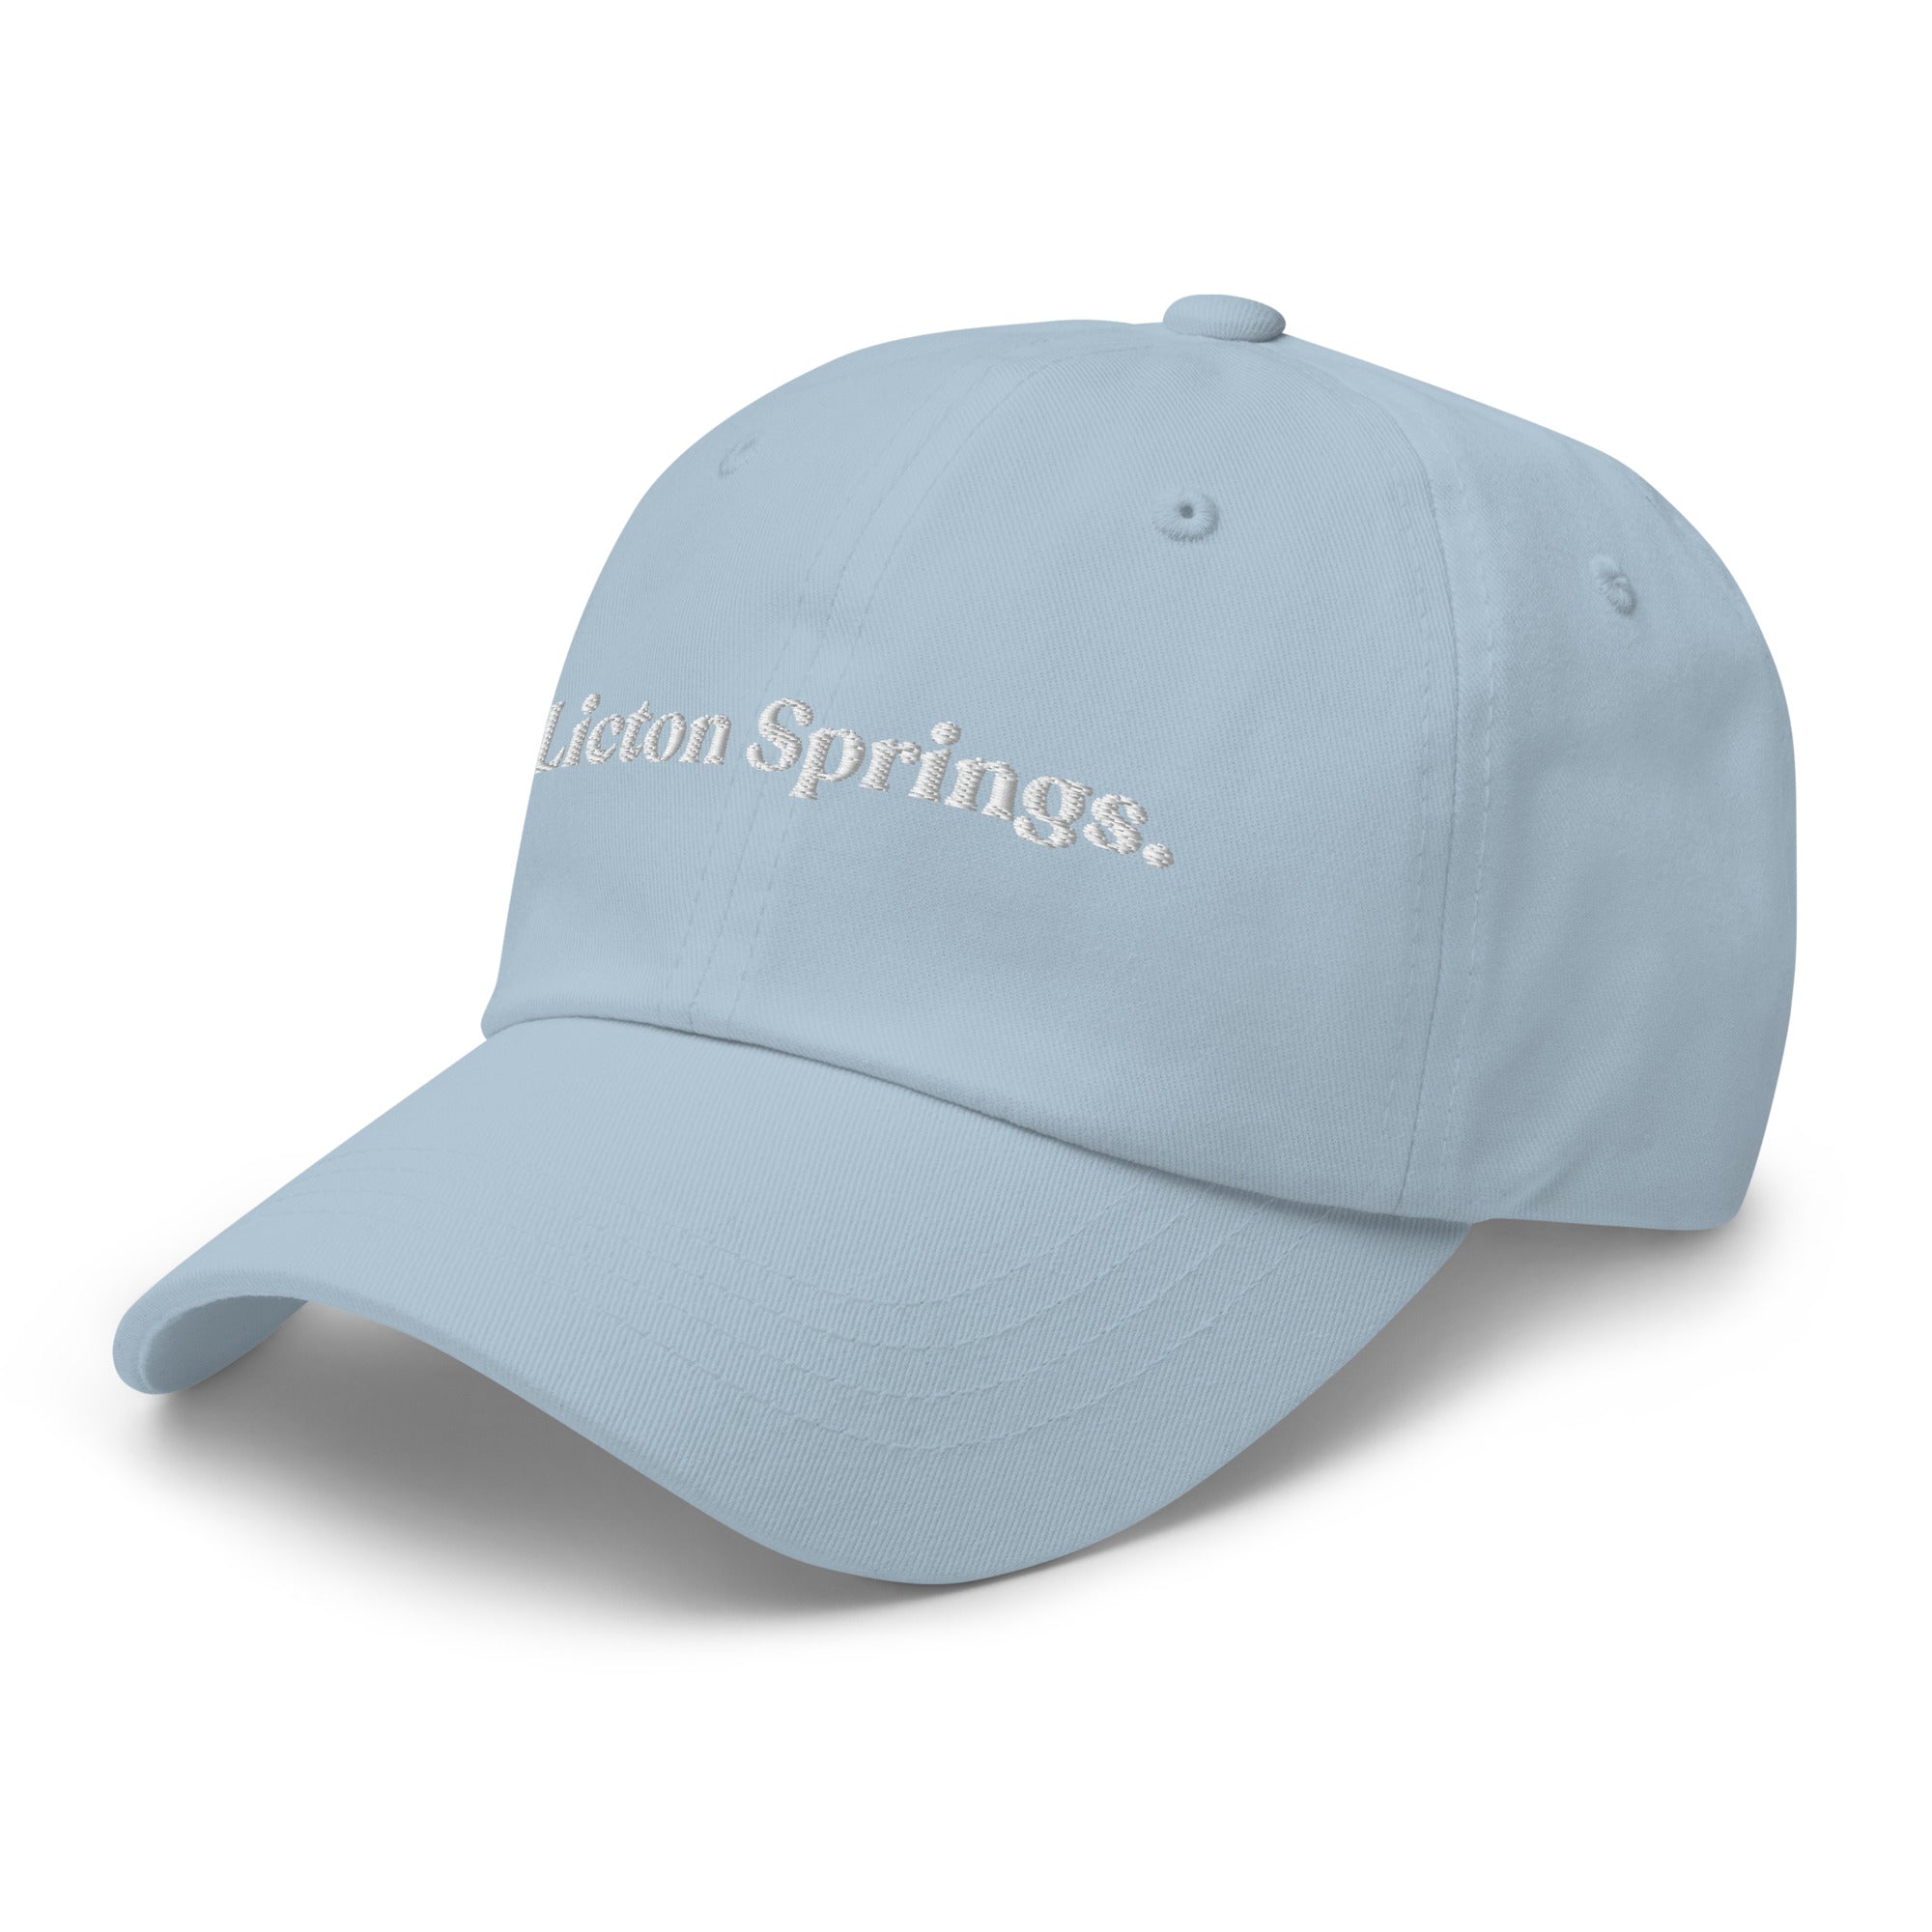 Classic Dad Hat - Licton Springs | Seattle, WA